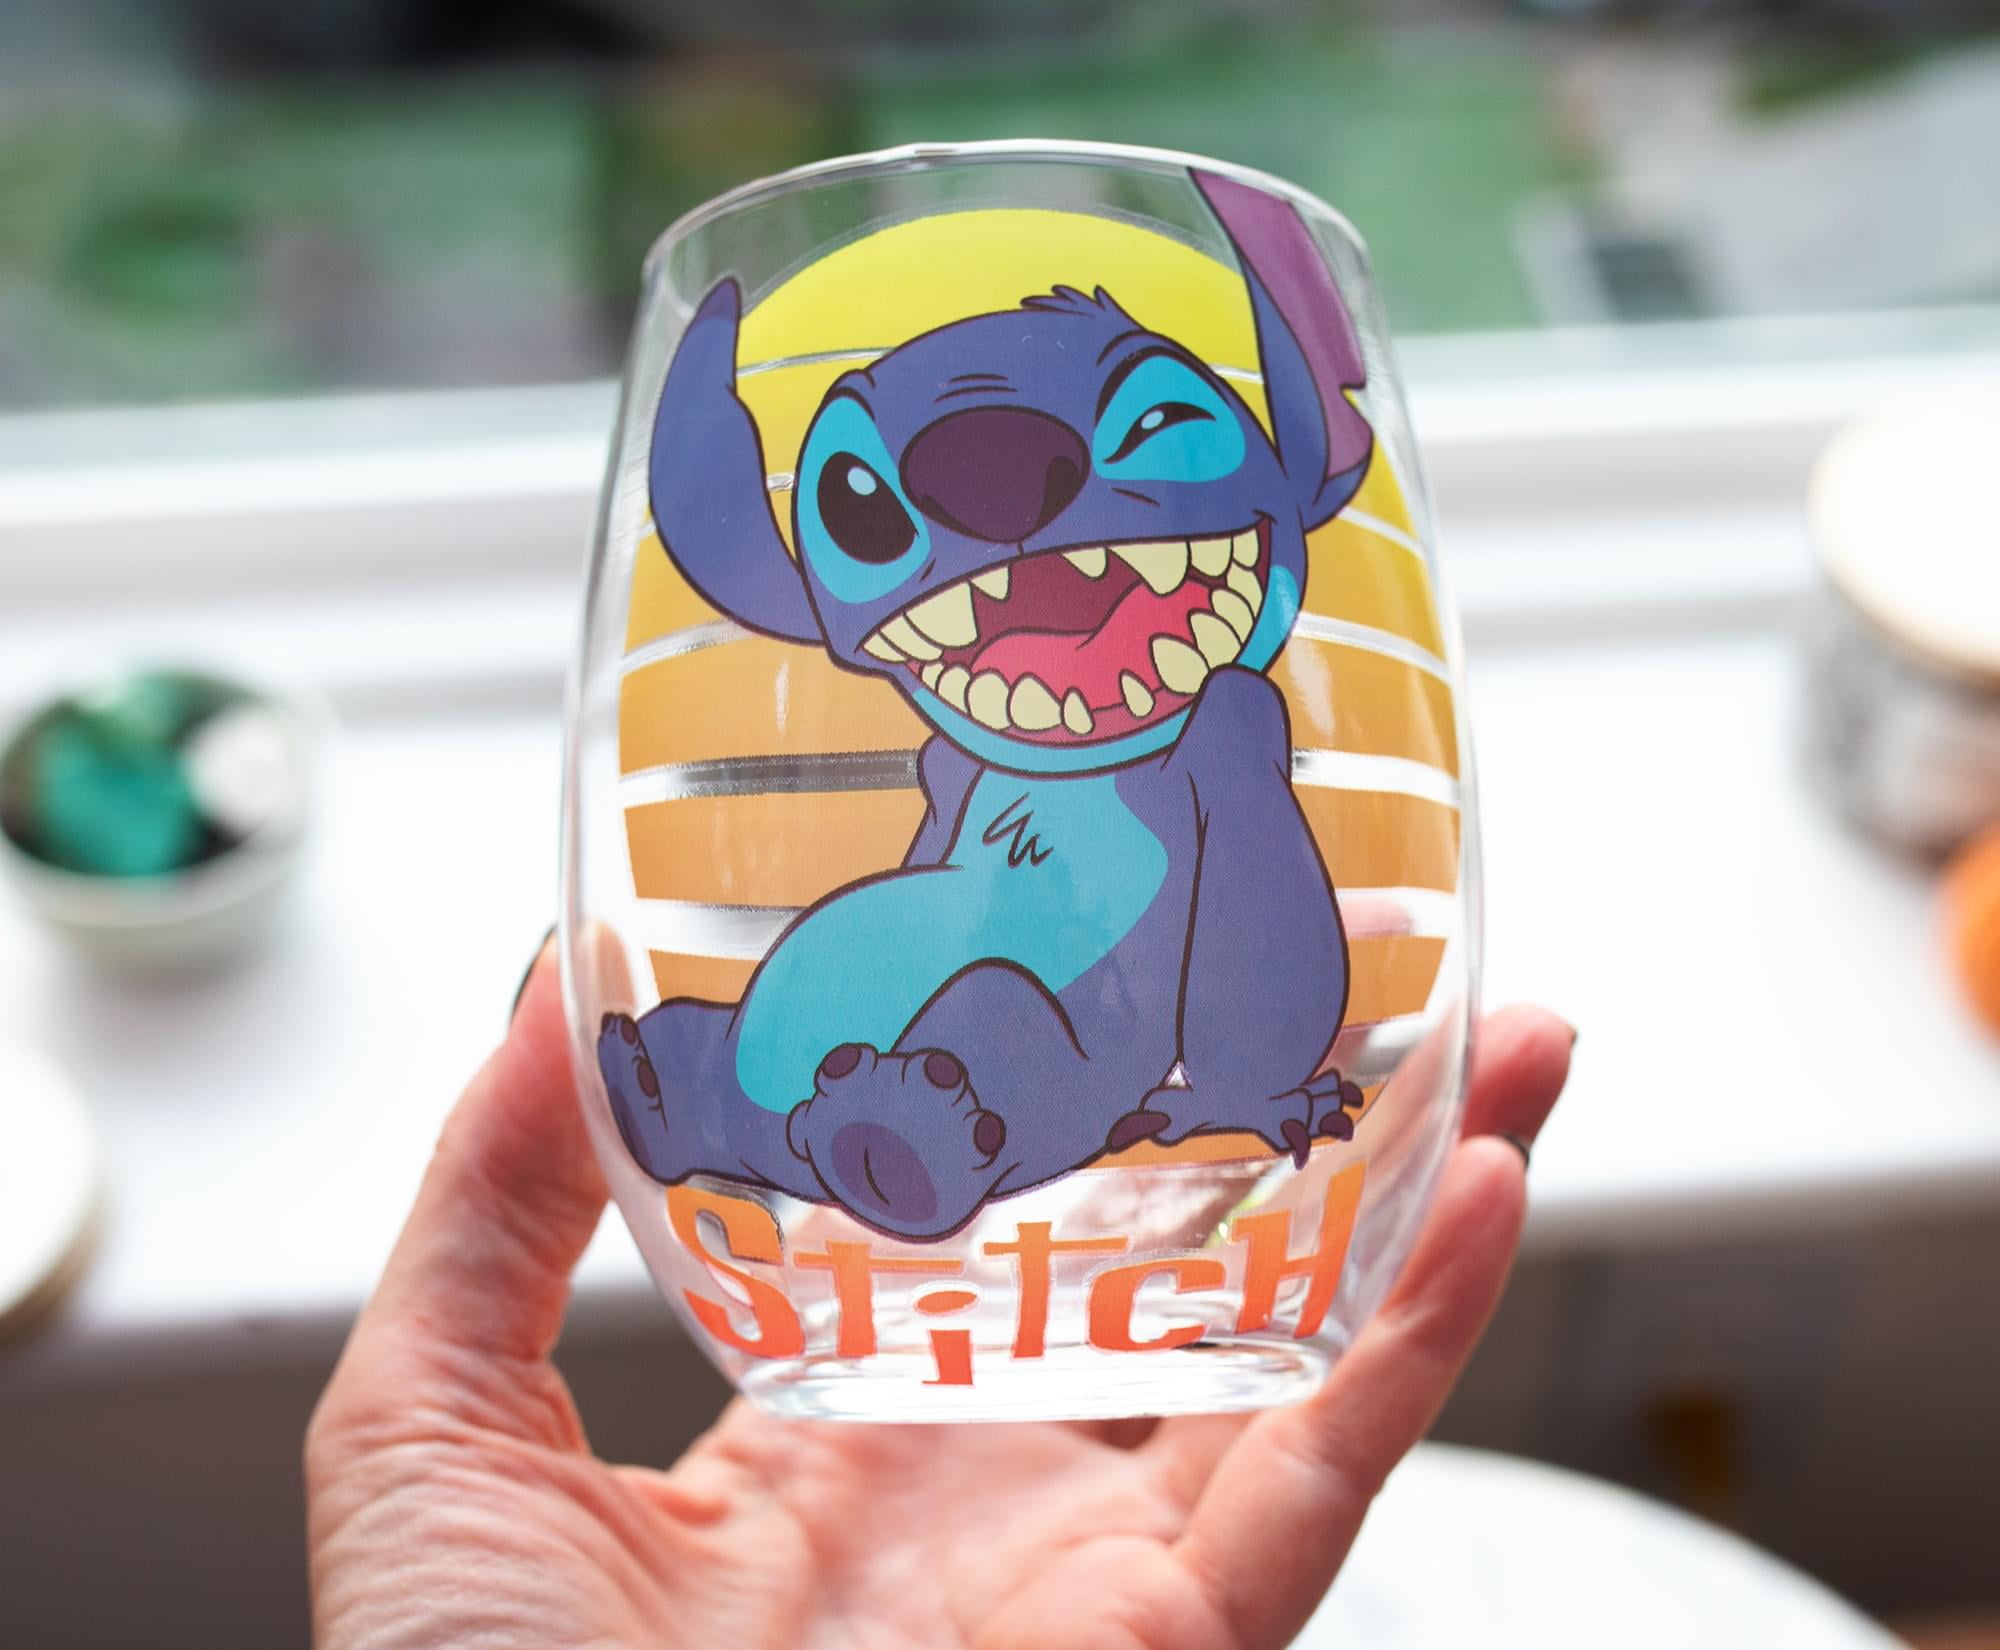 Disney Lilo and Stitch Ohana Means Family Floral Stemless Glasses | Set of 2